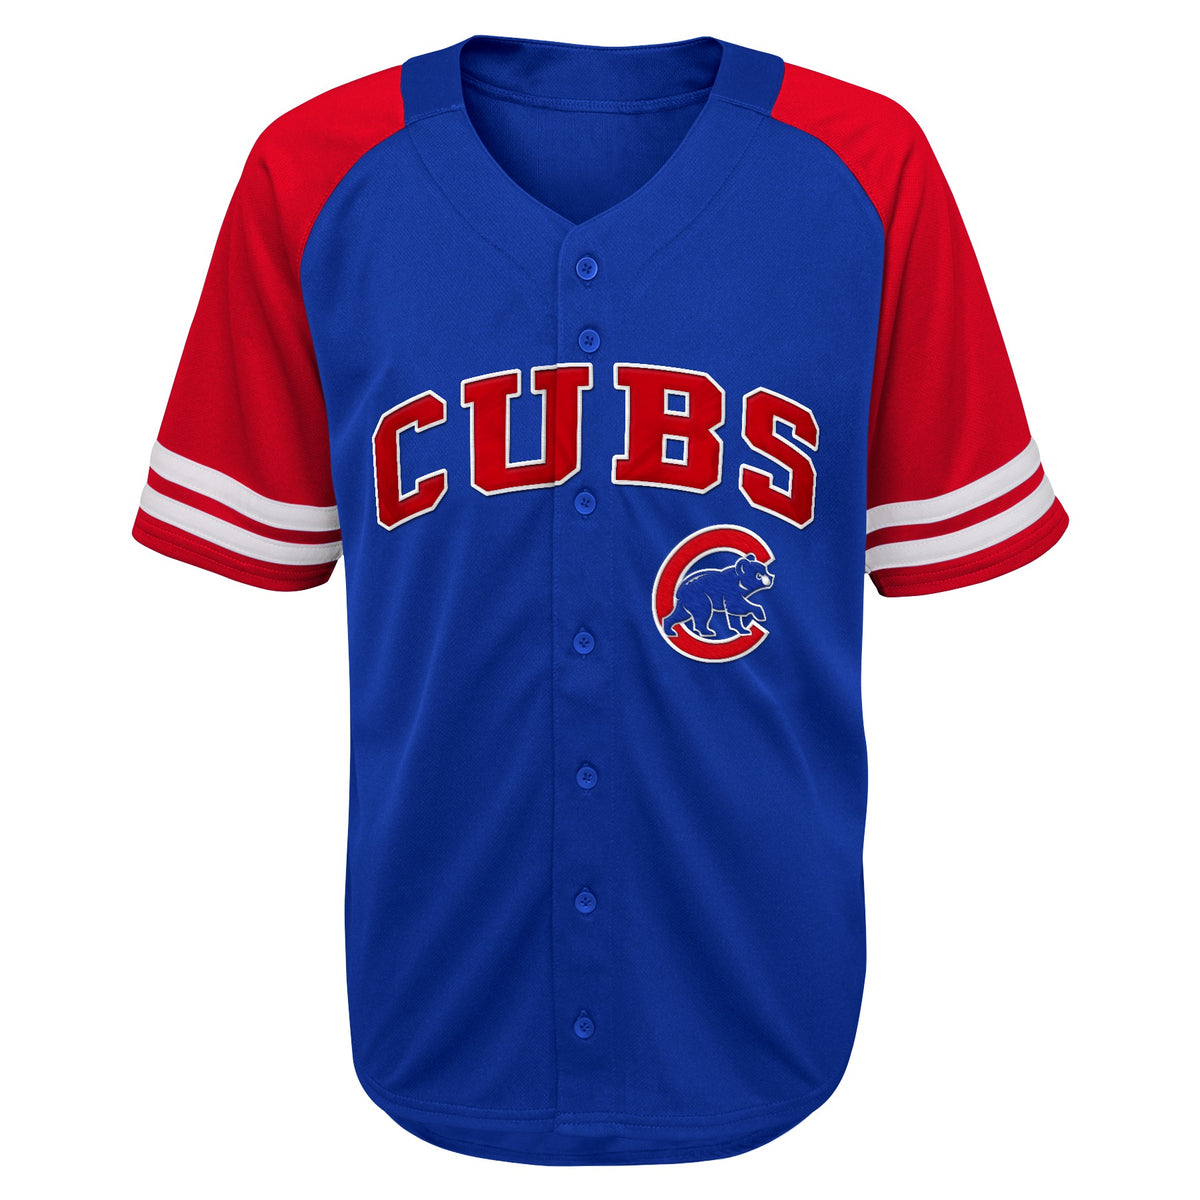 Outerstuff MLB Youth Boys Chicago Cubs Blank Baseball Jersey, Blue